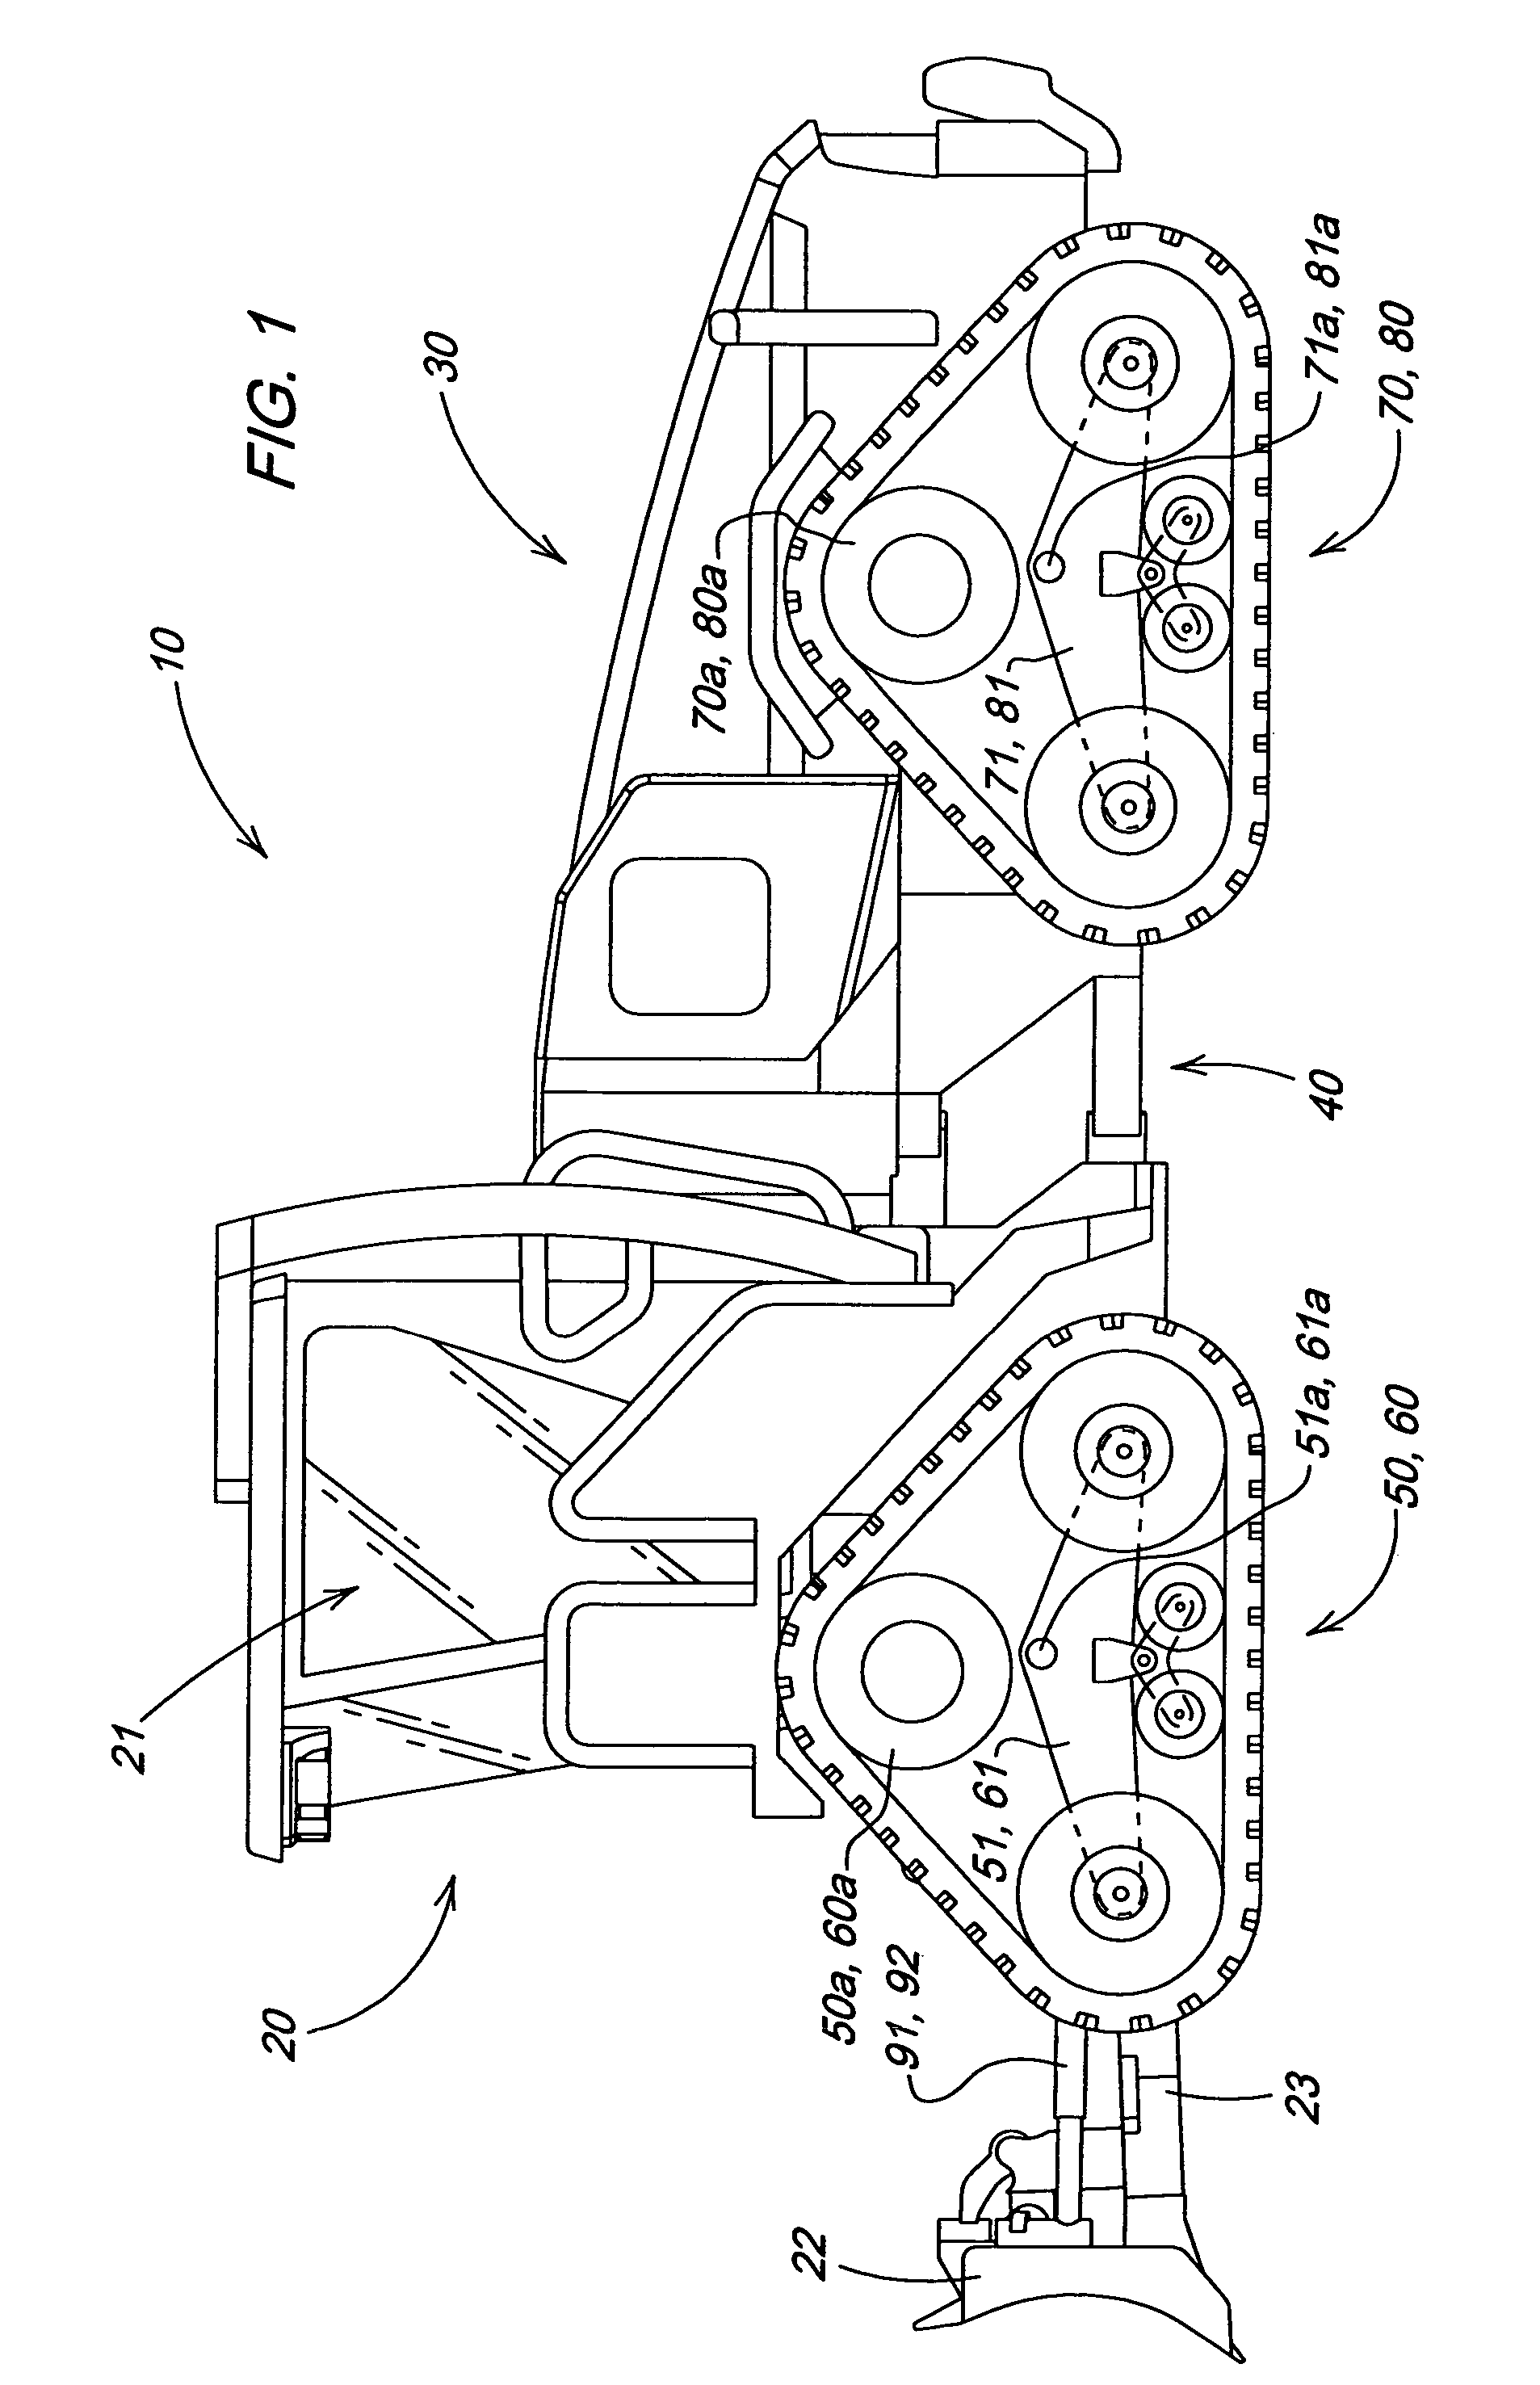 Articulated dozer with frame structure for decreased height variation in the vehicle chassis